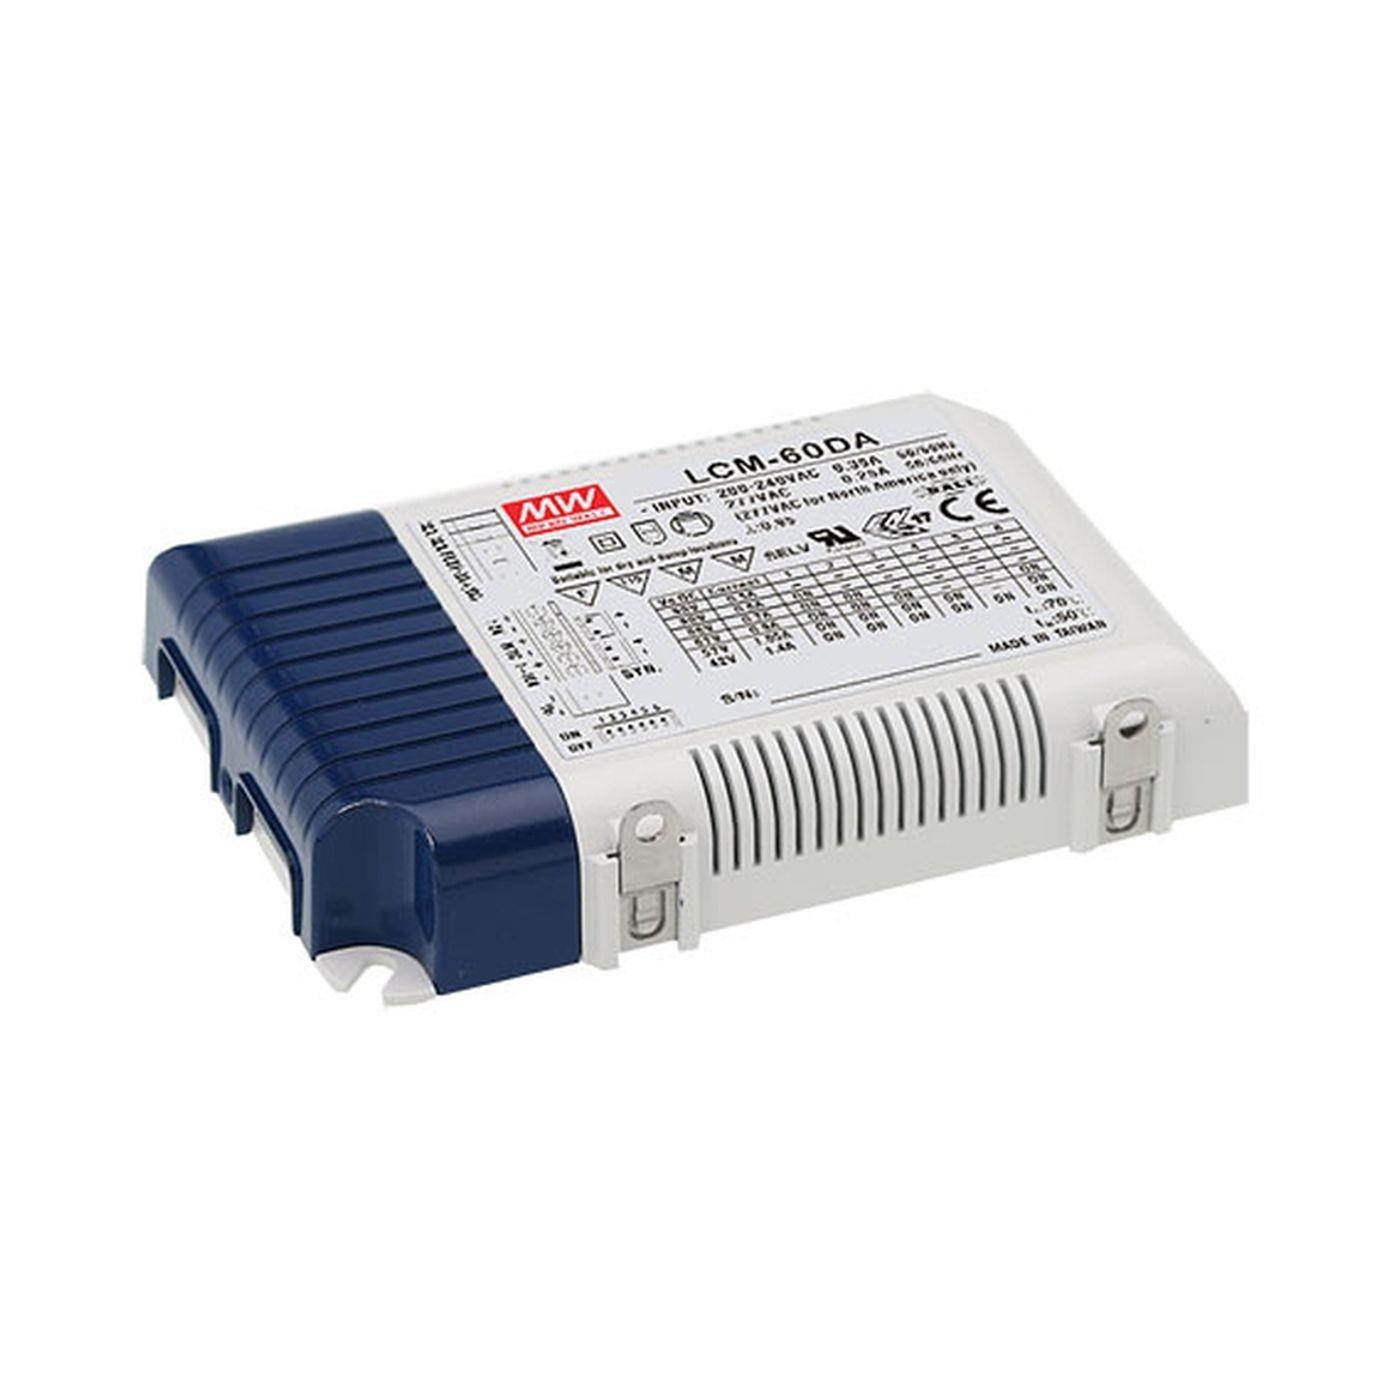 LCM-60DA 60W Dali Dimmable Constant current LED power supply Driver Transformer 500 600 700 900 1050 1400mA